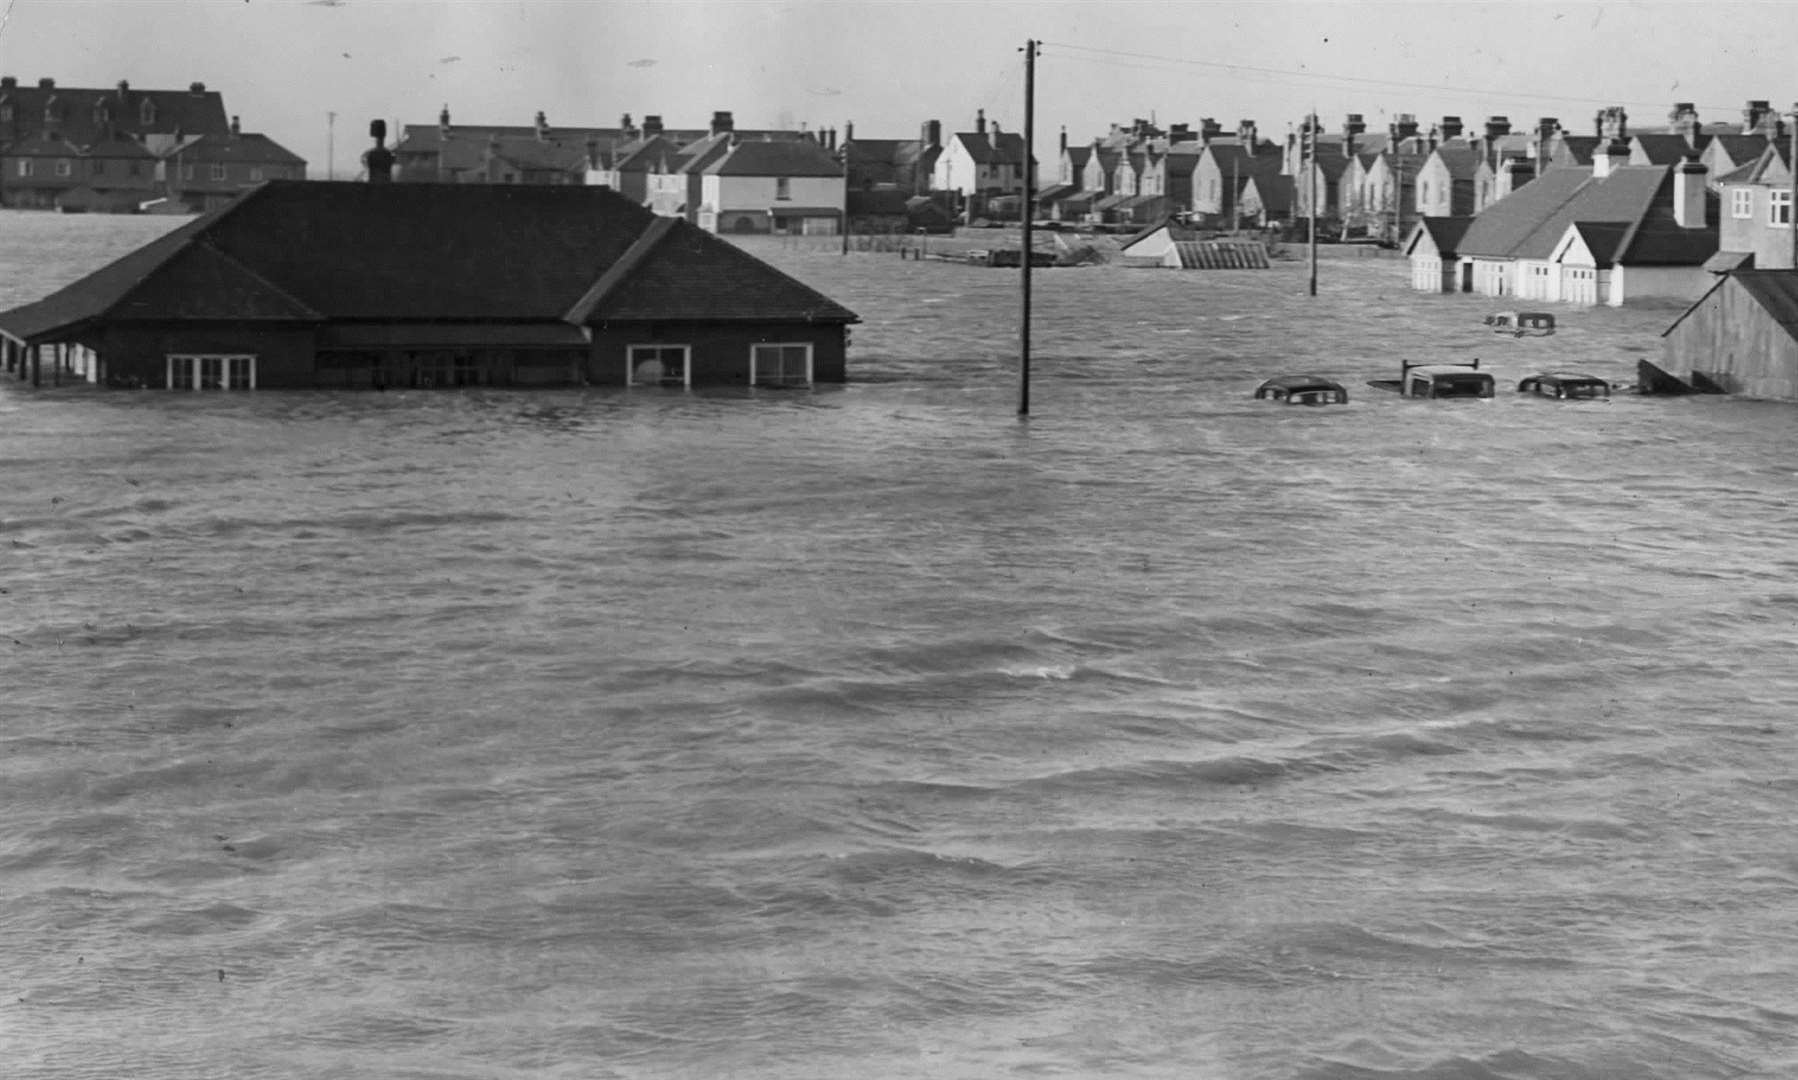 Whitstable Golf Club car park was left under water in 1953